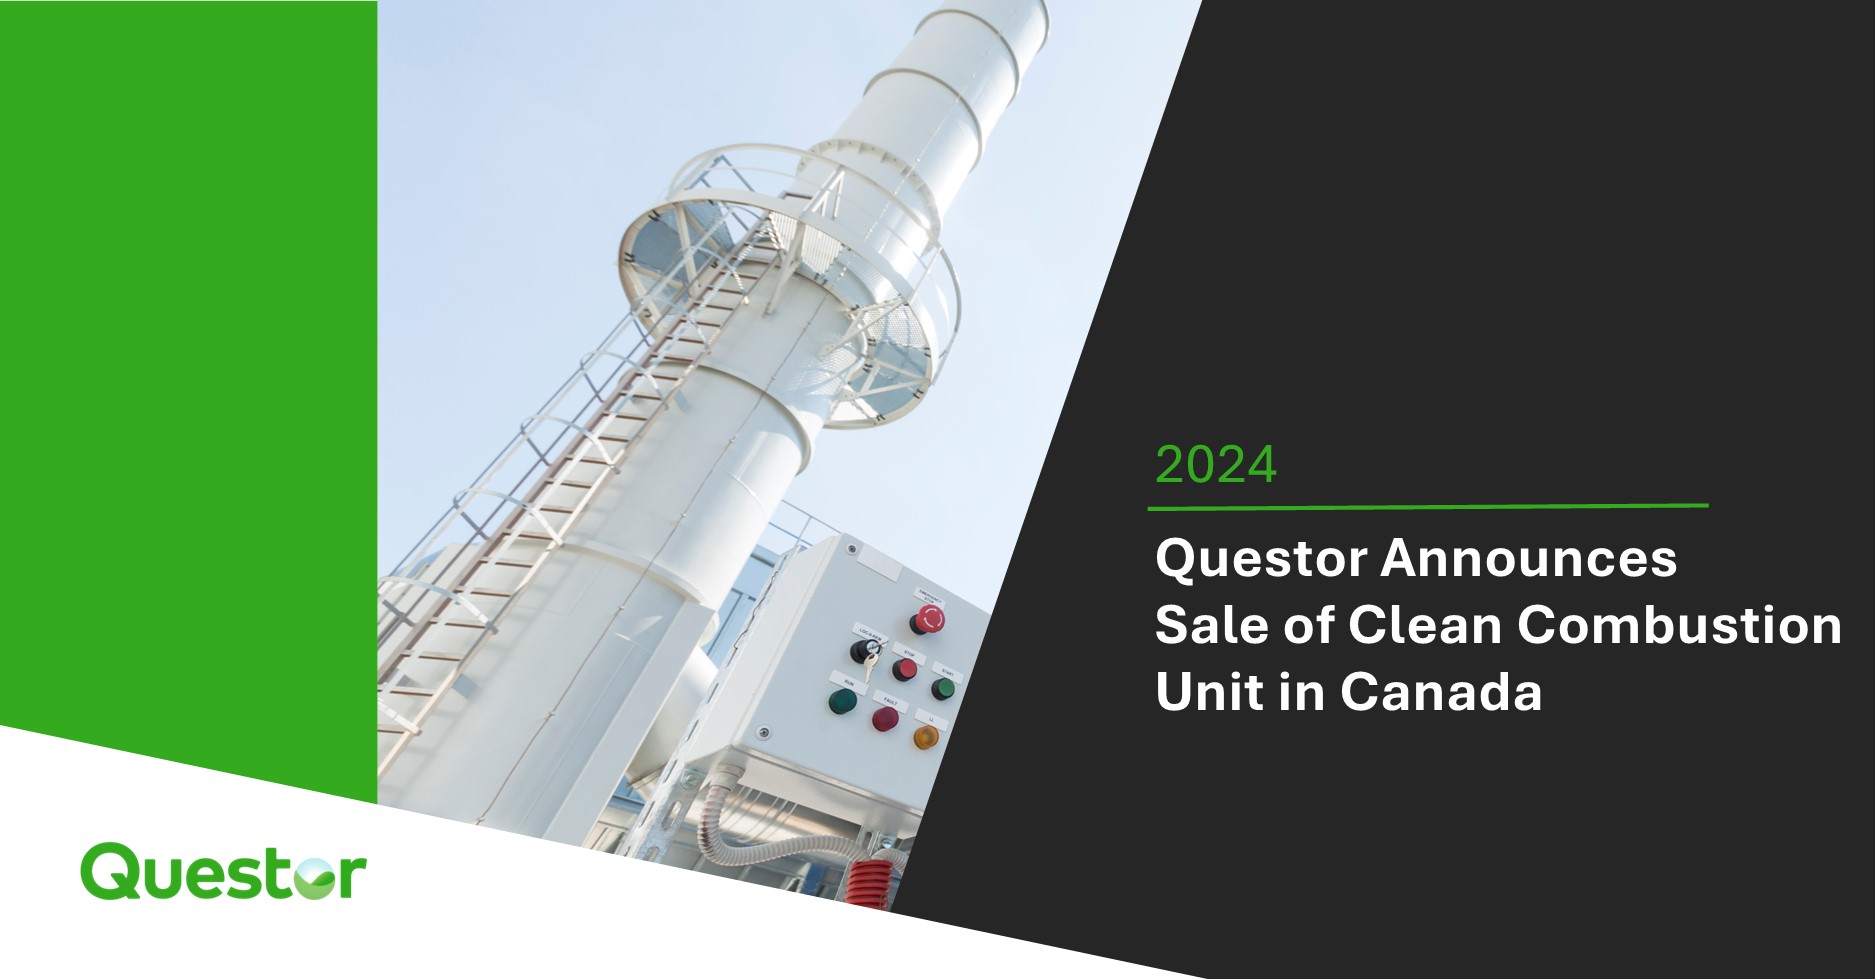 Questor Announces Sale of Clean Combustion Unit in Canada